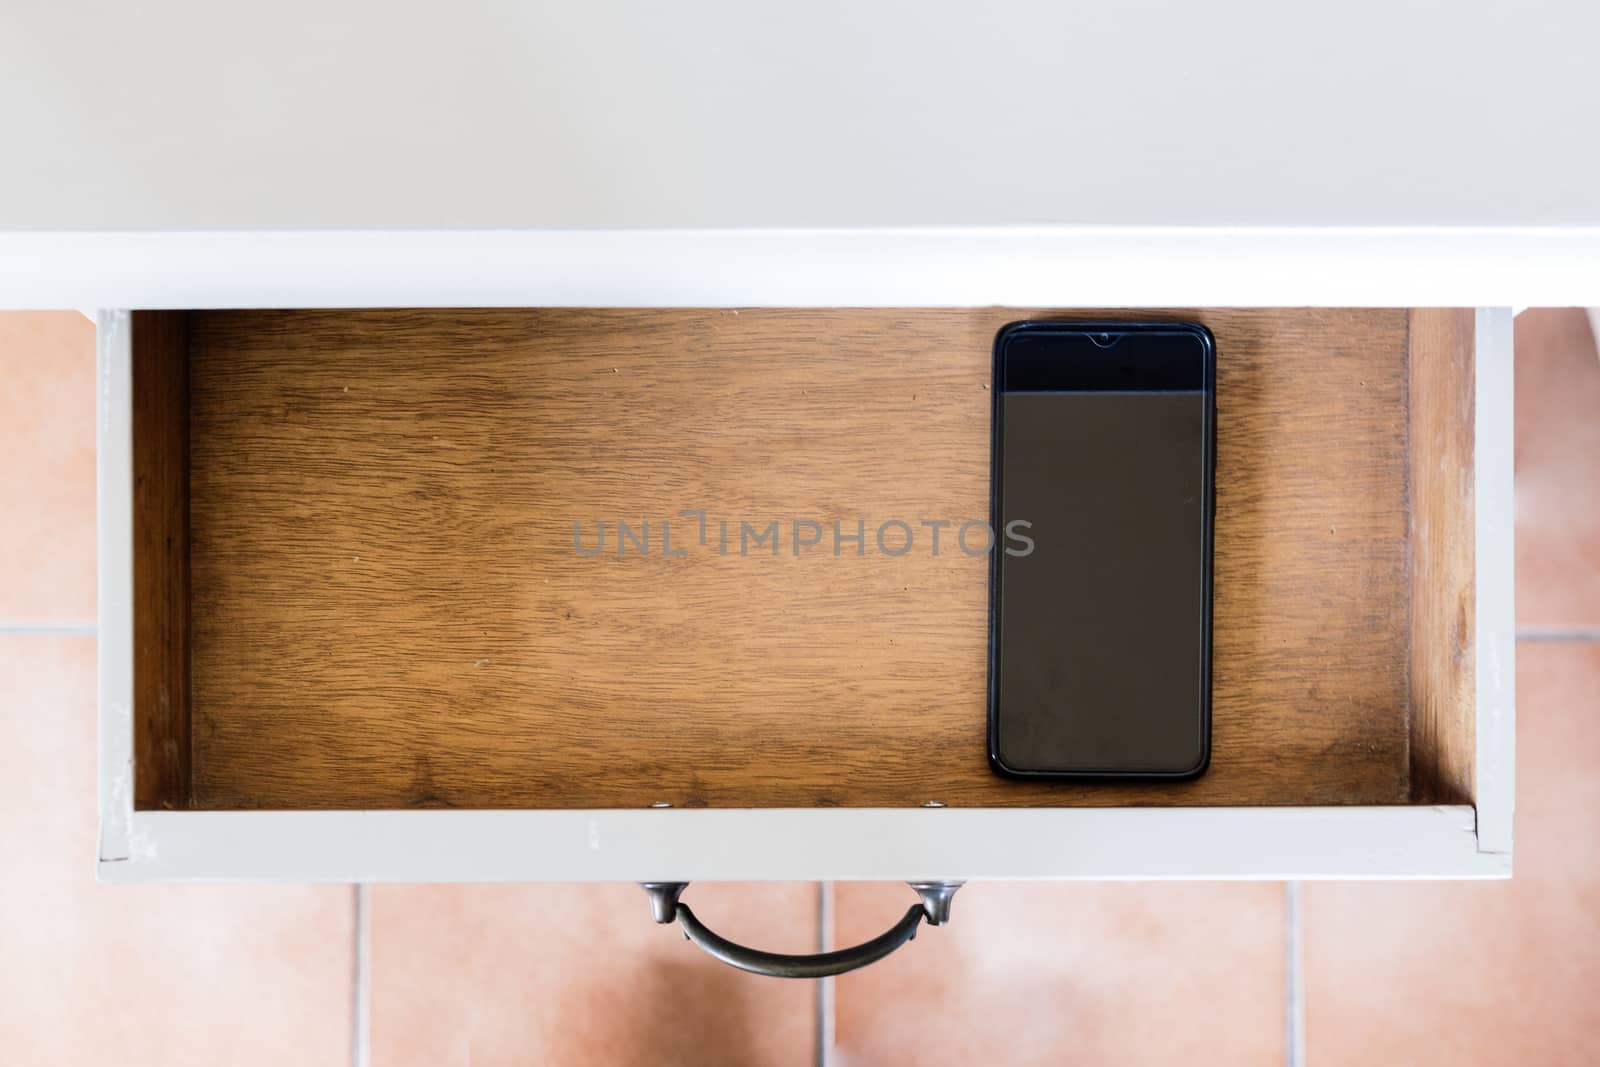 Mobile phone stored on a bedside table in a drawer that is open